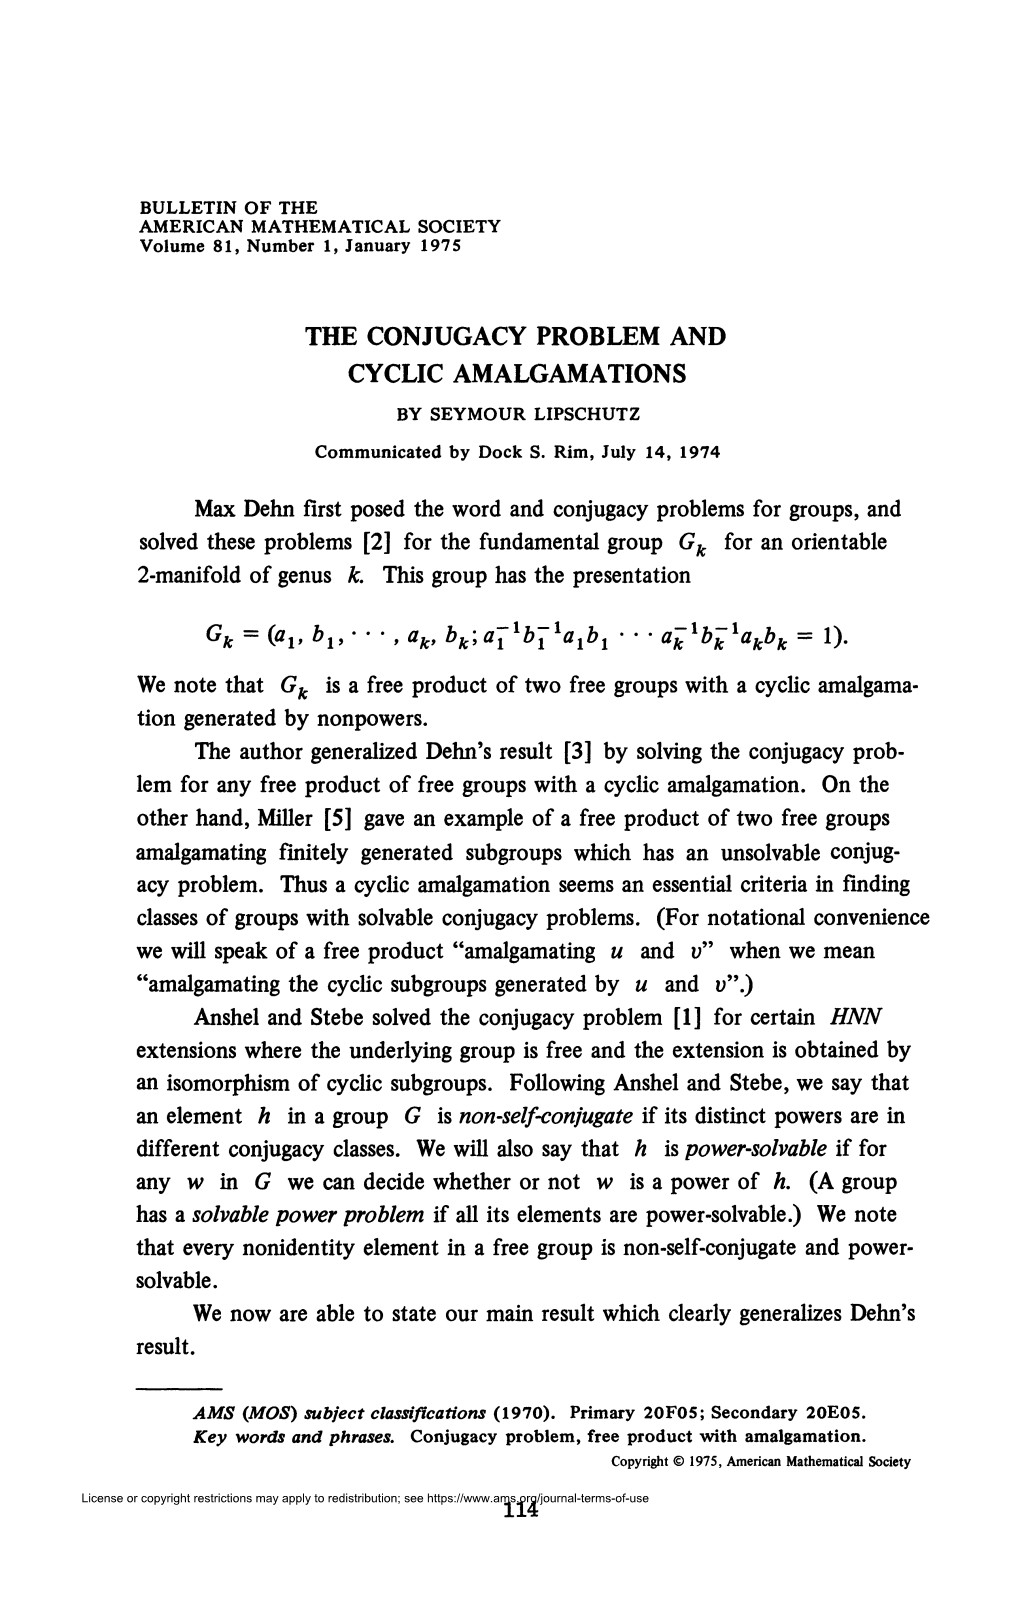 THE CONJUGACY PROBLEM and CYCLIC AMALGAMATIONS Max Dehn First Posed the Word and Conjugacy Problems for Groups, and Solved These